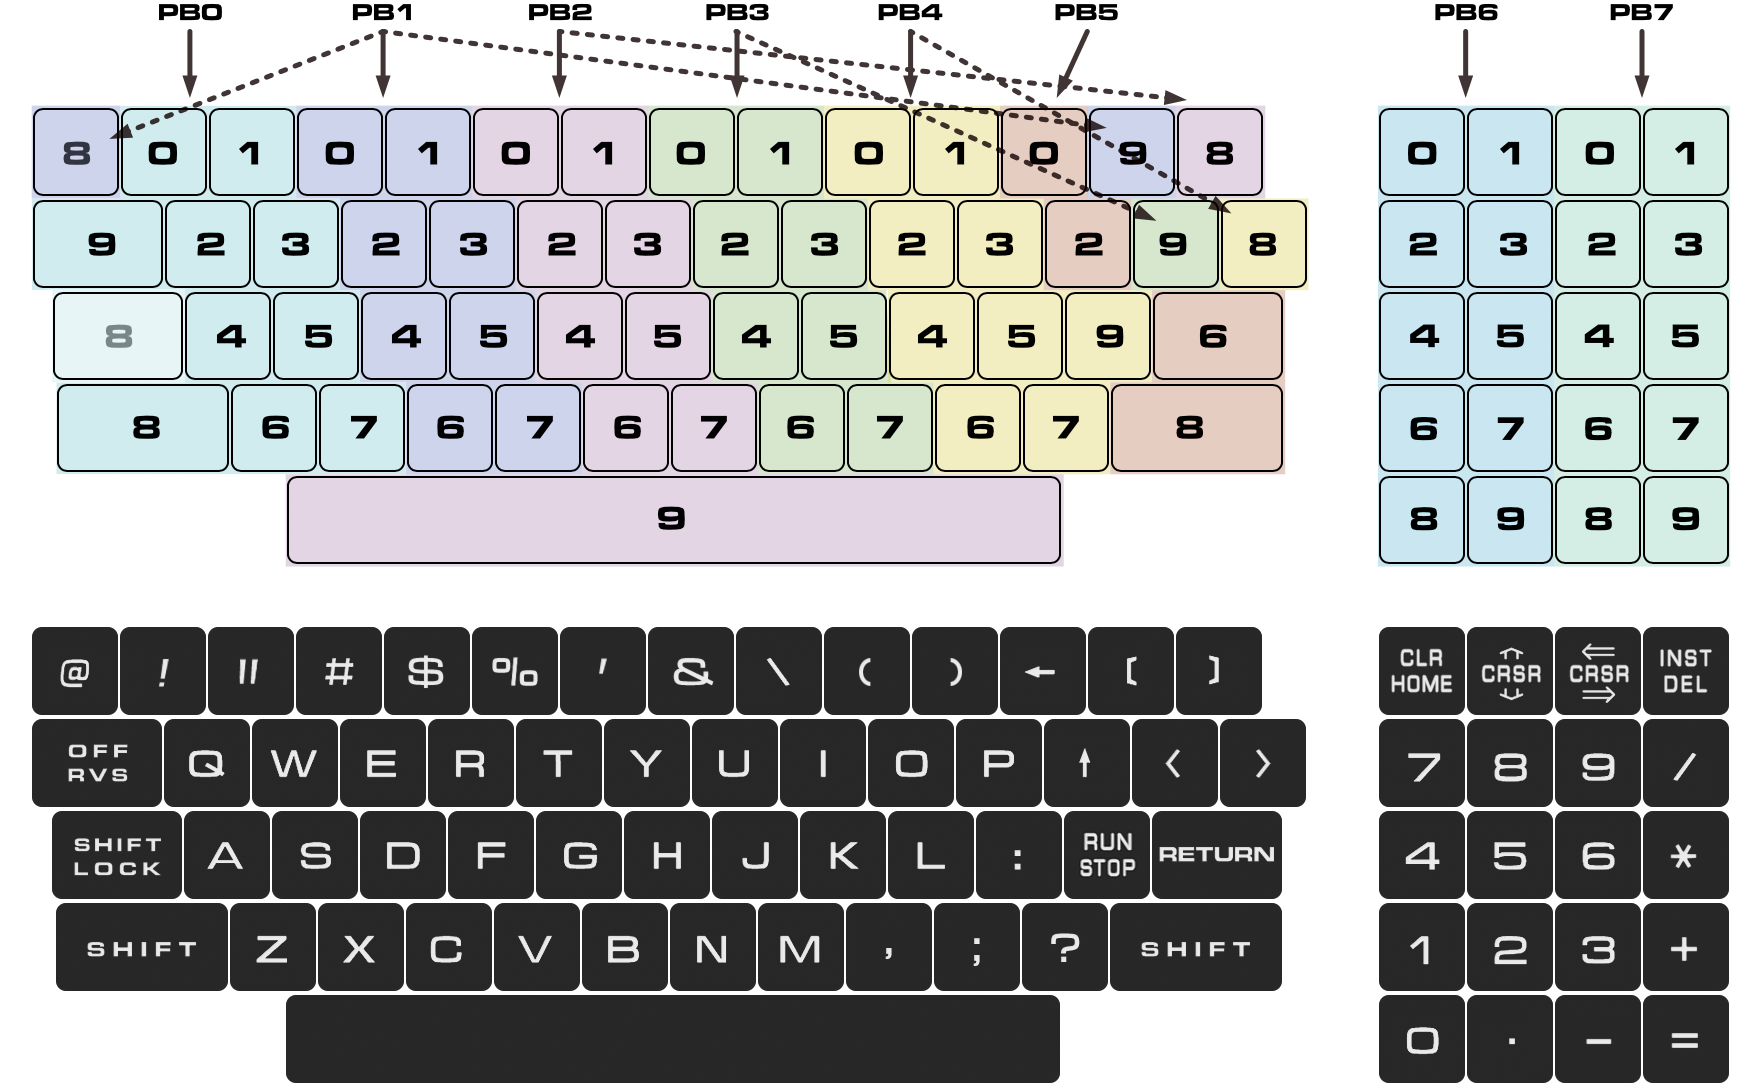 The graphics keyboard of the Commodore PET 2001N: layout and key matrix